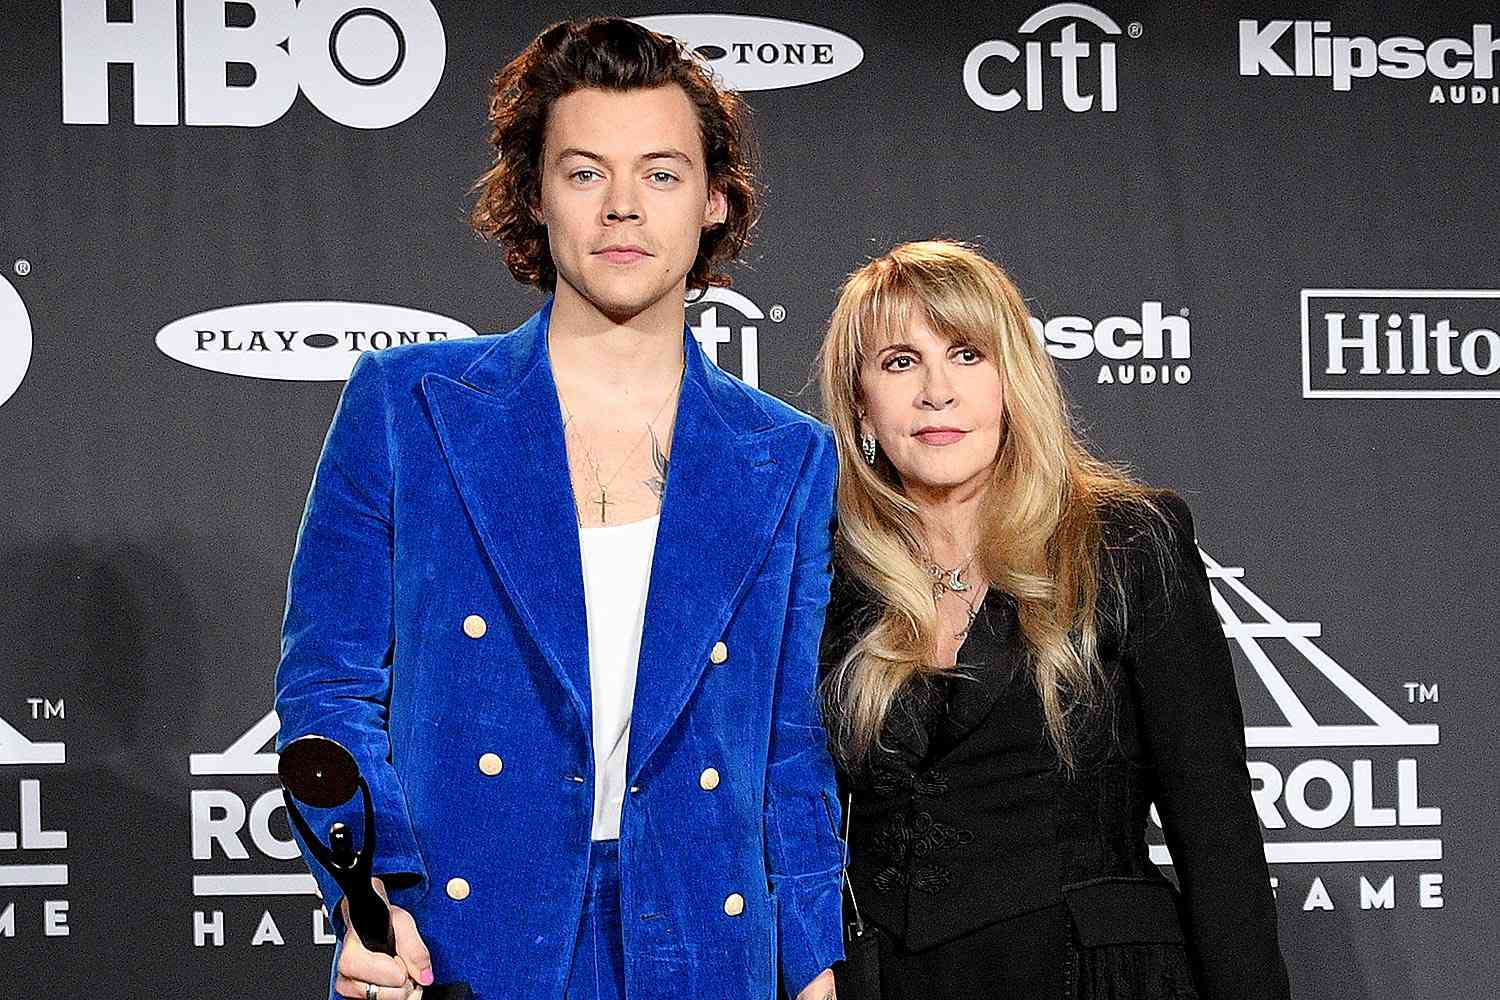 Harry Styles Joins Stevie Nicks Onstage for ‘Landslide’ Tribute to Christine McVie [Video]